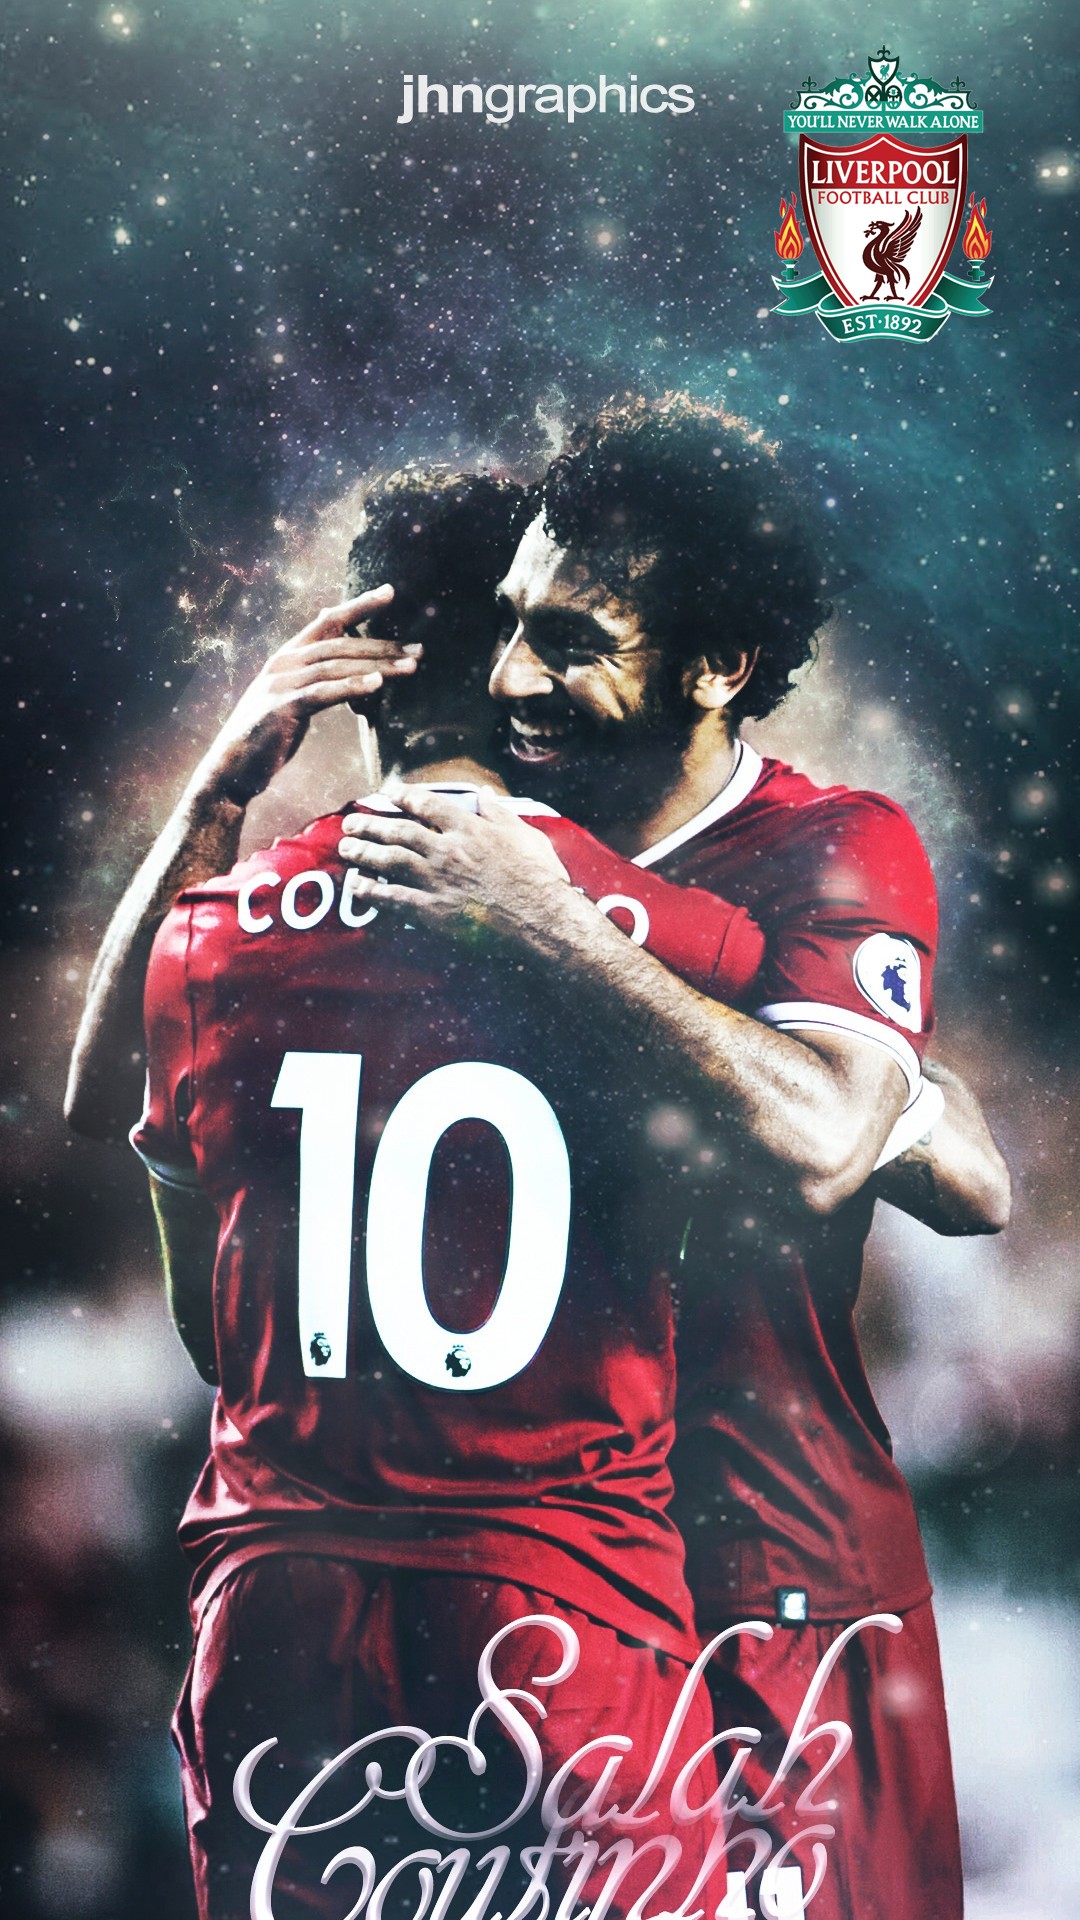 iPhone 7 Wallpaper Liverpool Mohamed Salah with resolution 1080X1920 pixel. You can make this wallpaper for your iPhone 5, 6, 7, 8, X backgrounds, Mobile Screensaver, or iPad Lock Screen